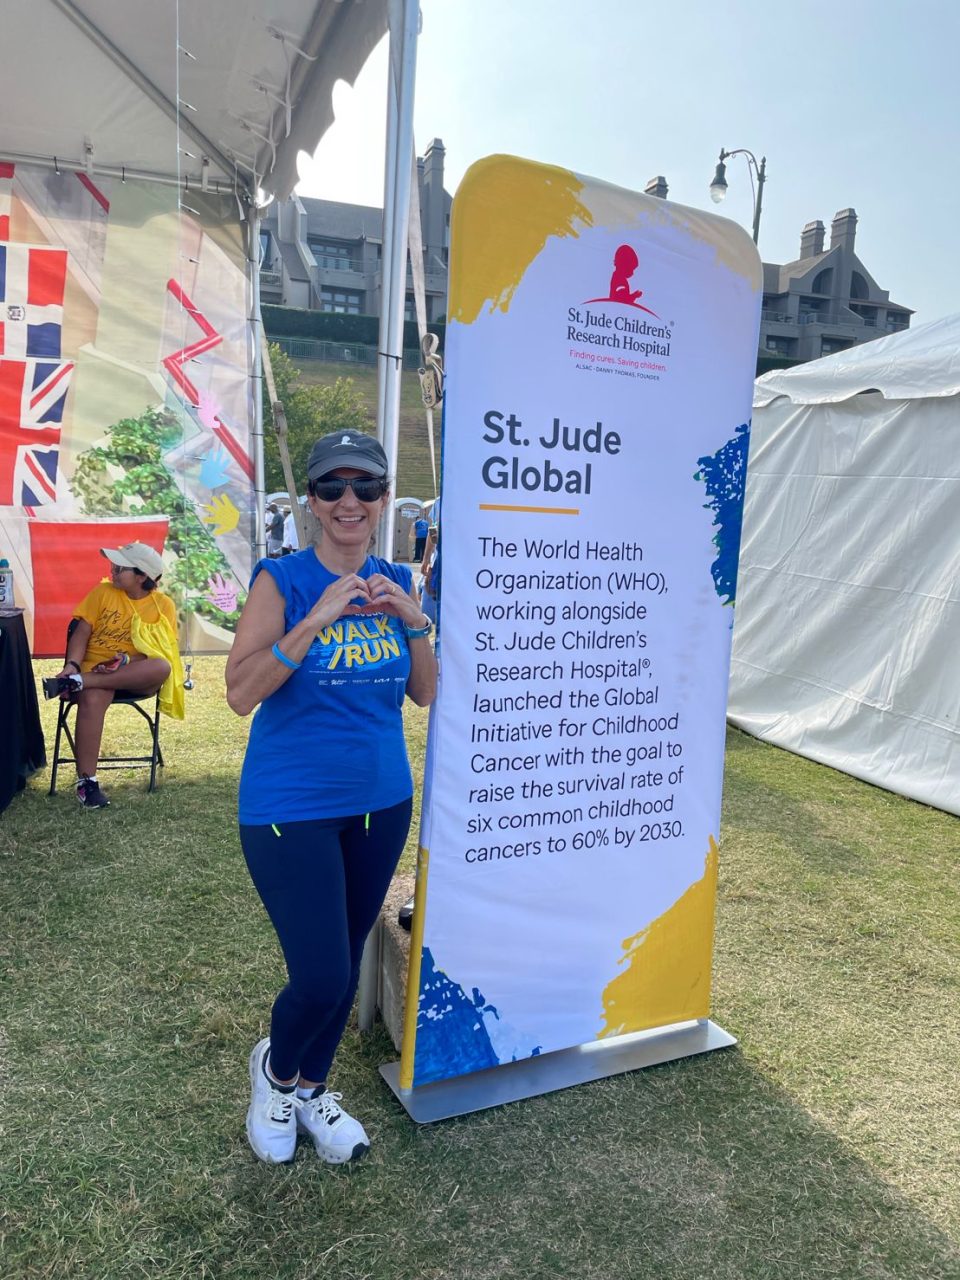 Lama Najjar: I did it! Yesterday, I ran the St. Jude Walk/Run in Memphis, Tennessee, after a week of hosting and training 13 St. Jude Global Alliance foundation members from around the world.